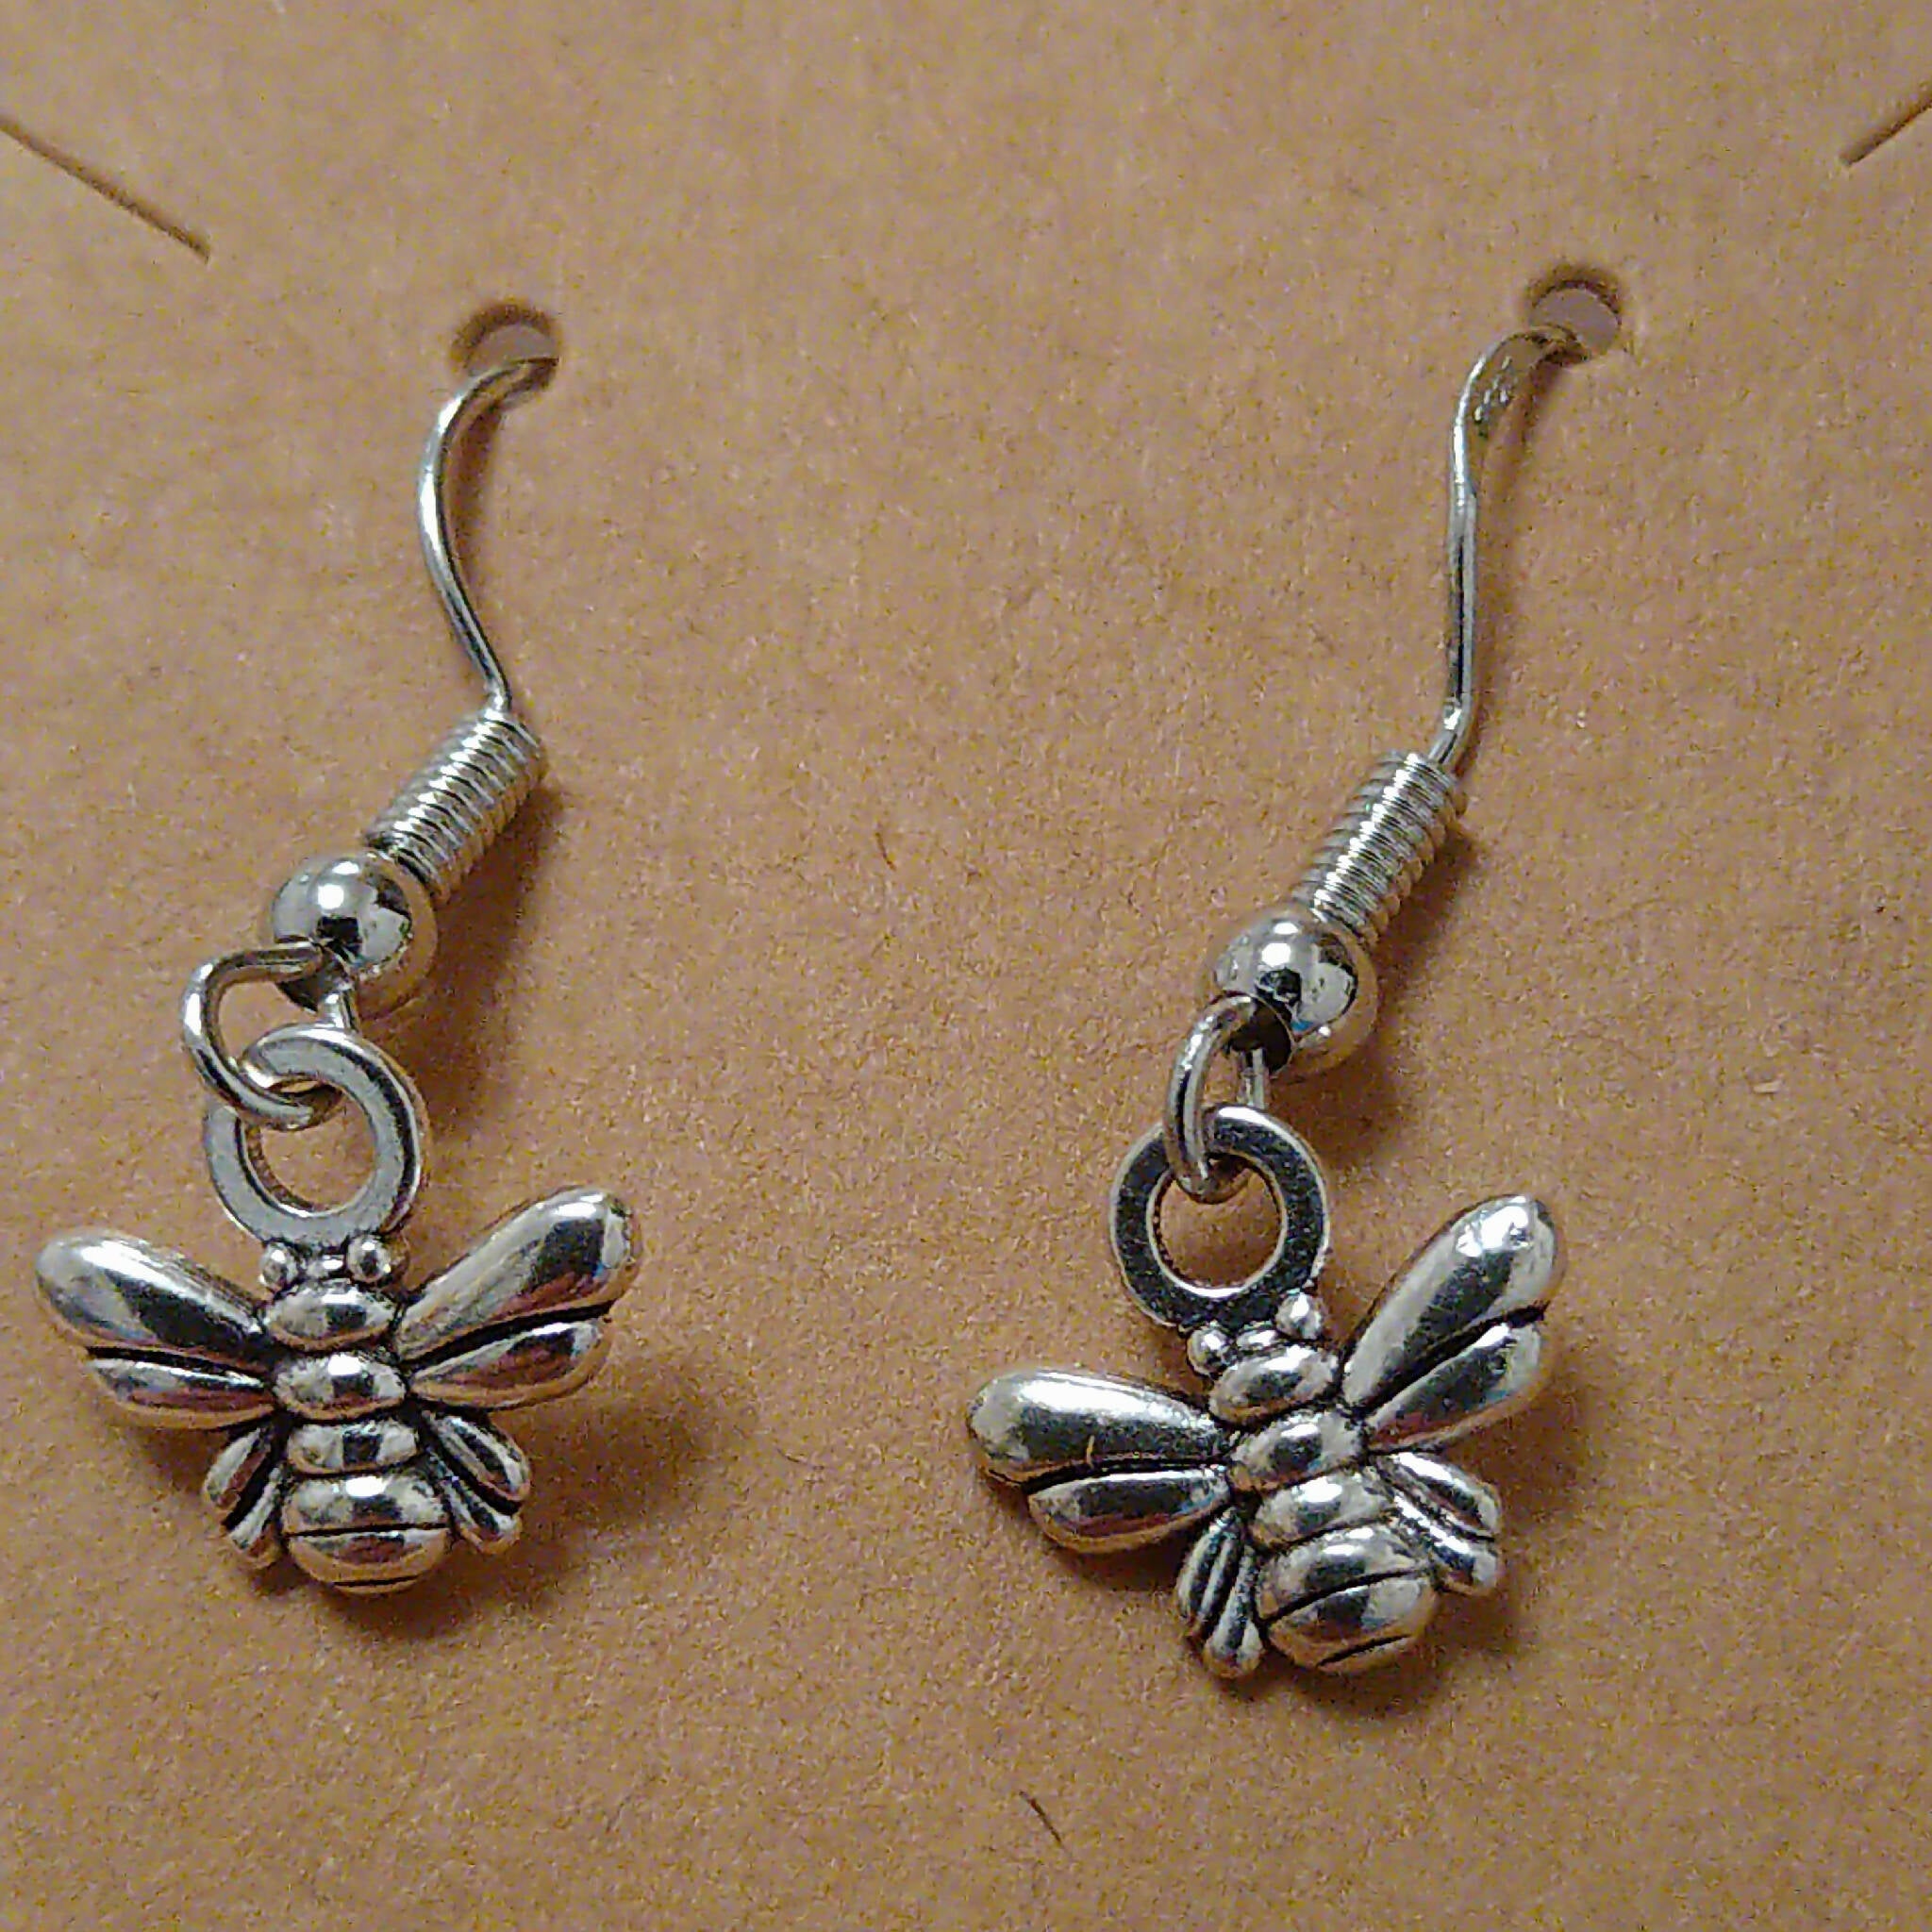 Handmade earrings with silver coloured bee charms